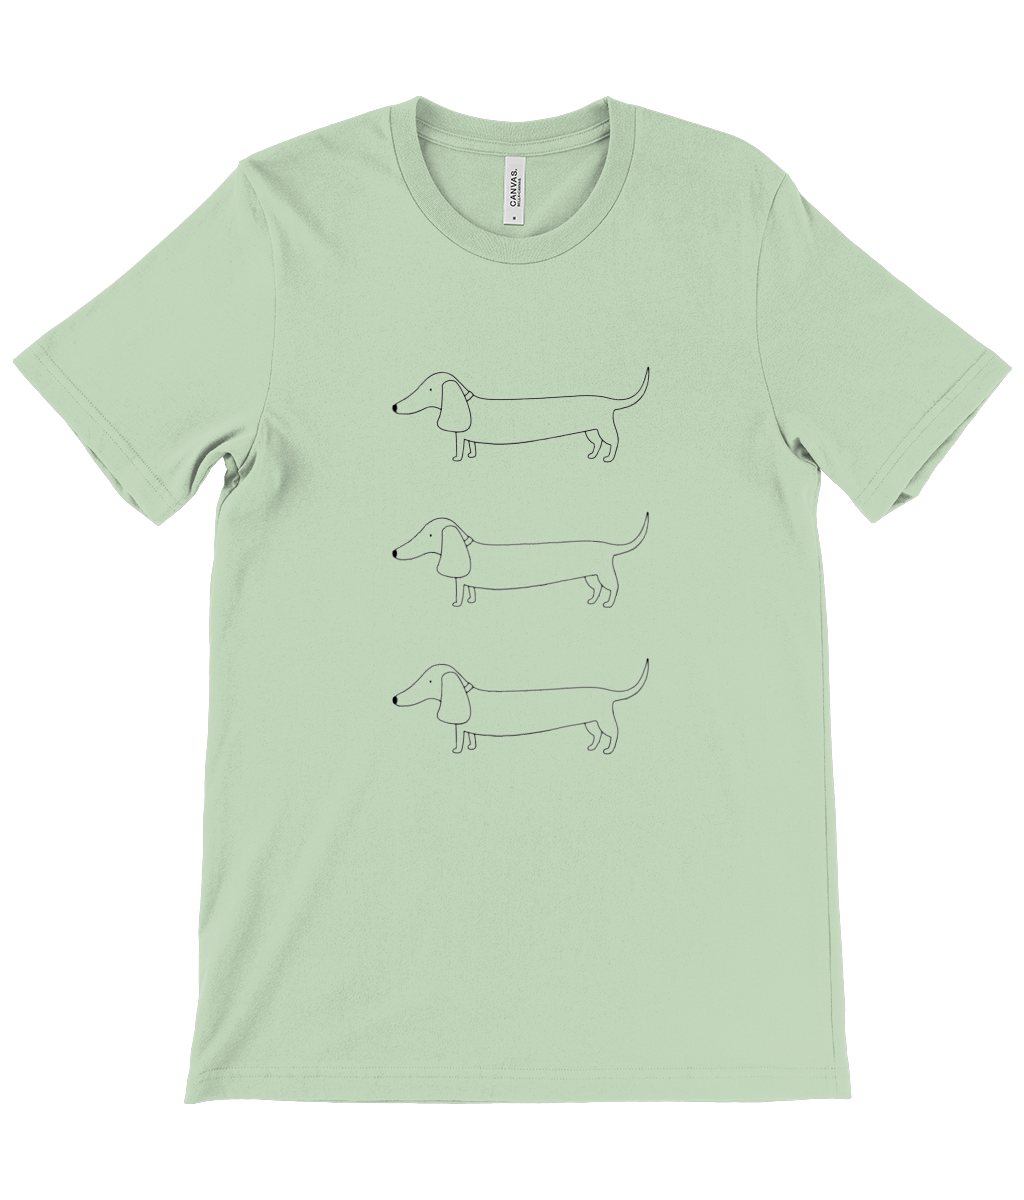 Mint Green unisex t-shirt. Design on front shows 3 outline drawings of sausage dogs, in a column one above the other.